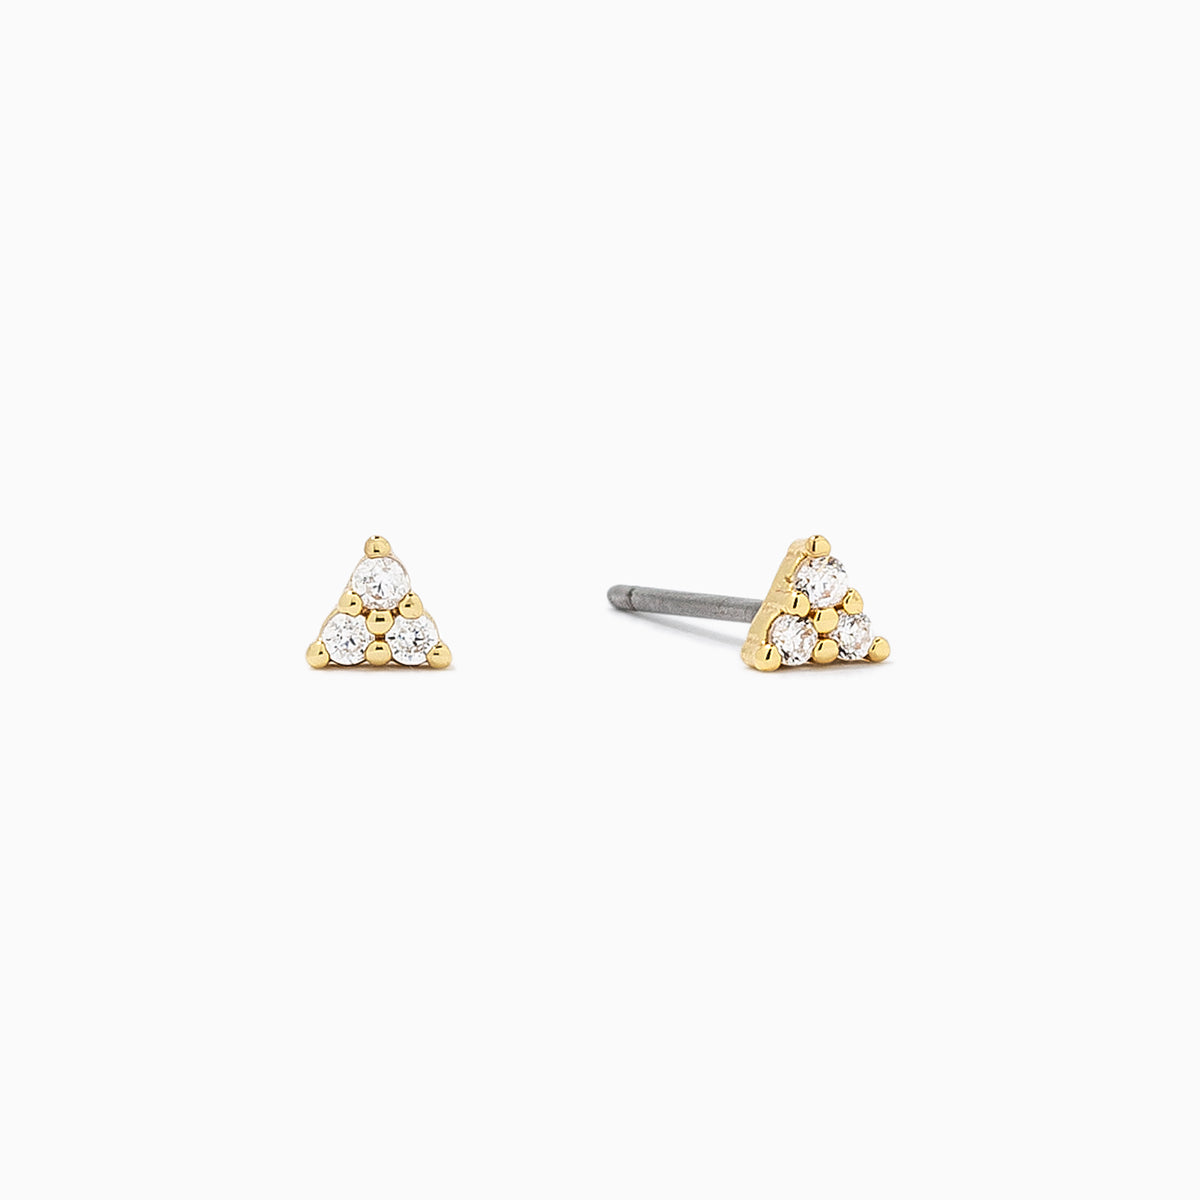 Every Angle Stud Earrings | Gold | Product Image | Uncommon James